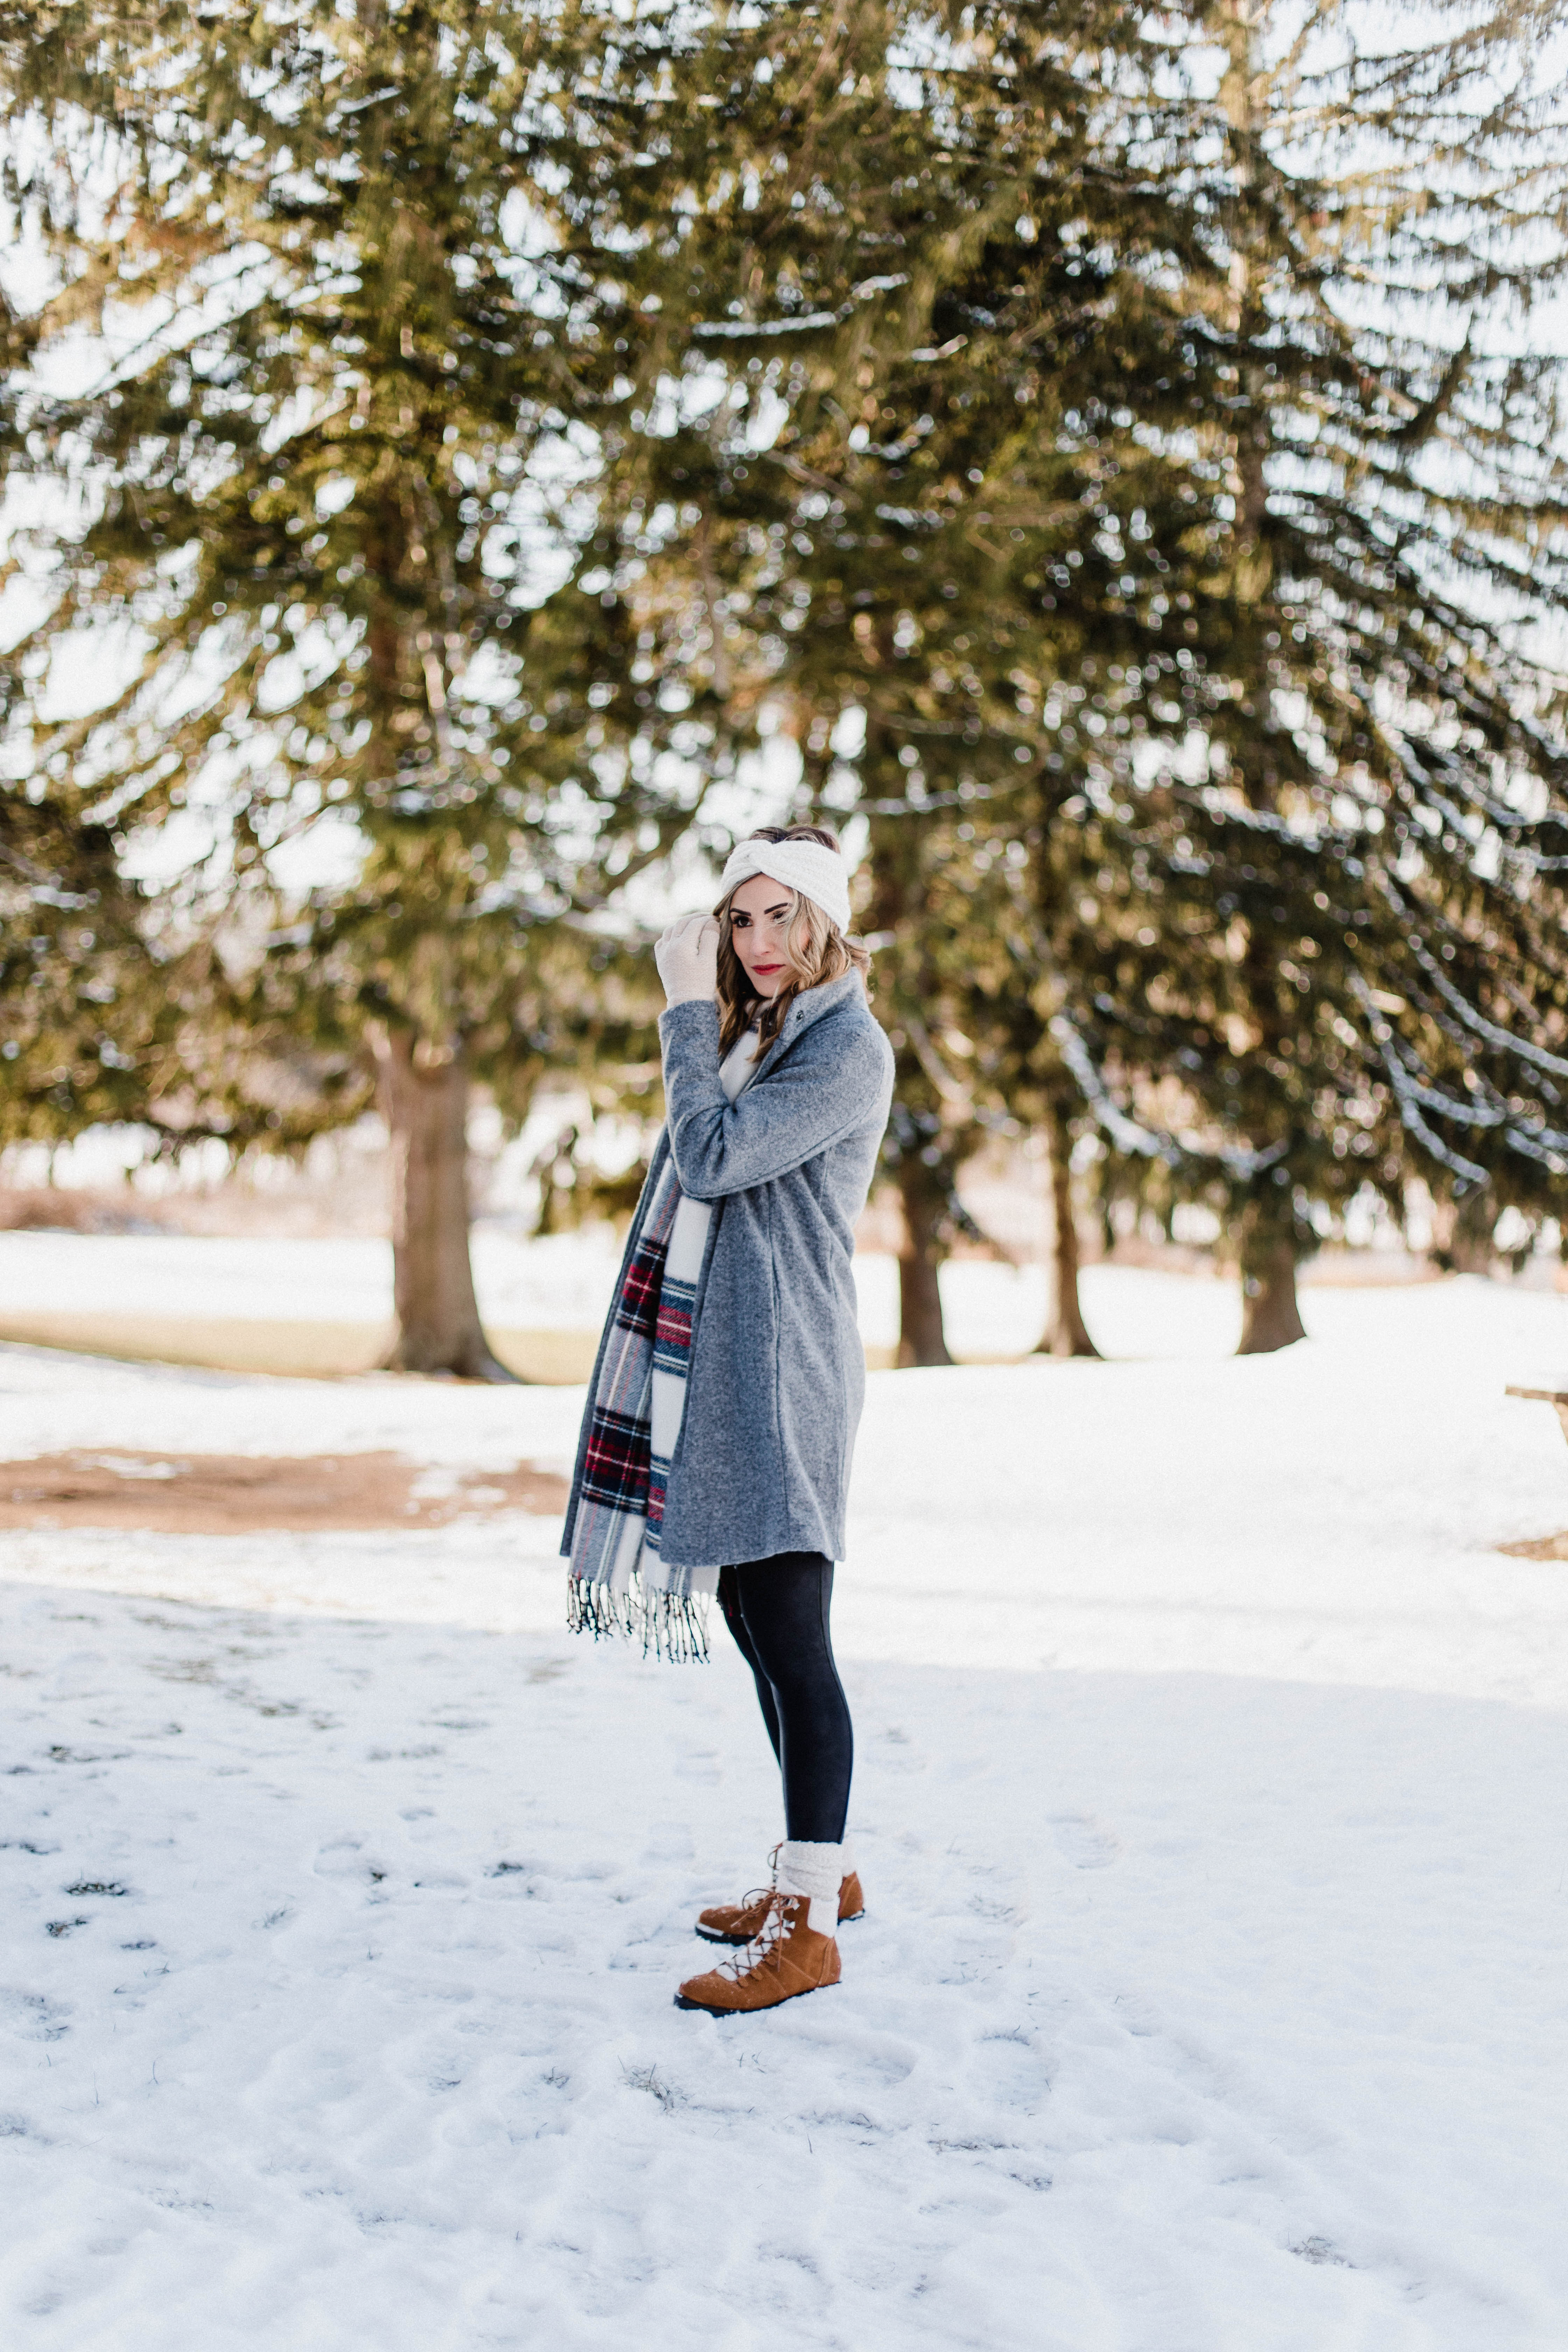 Connecticut life and style blogger Lauren McBride shares a pair of faux-fur shearling boots that are under $100 and perfect for the winter season.